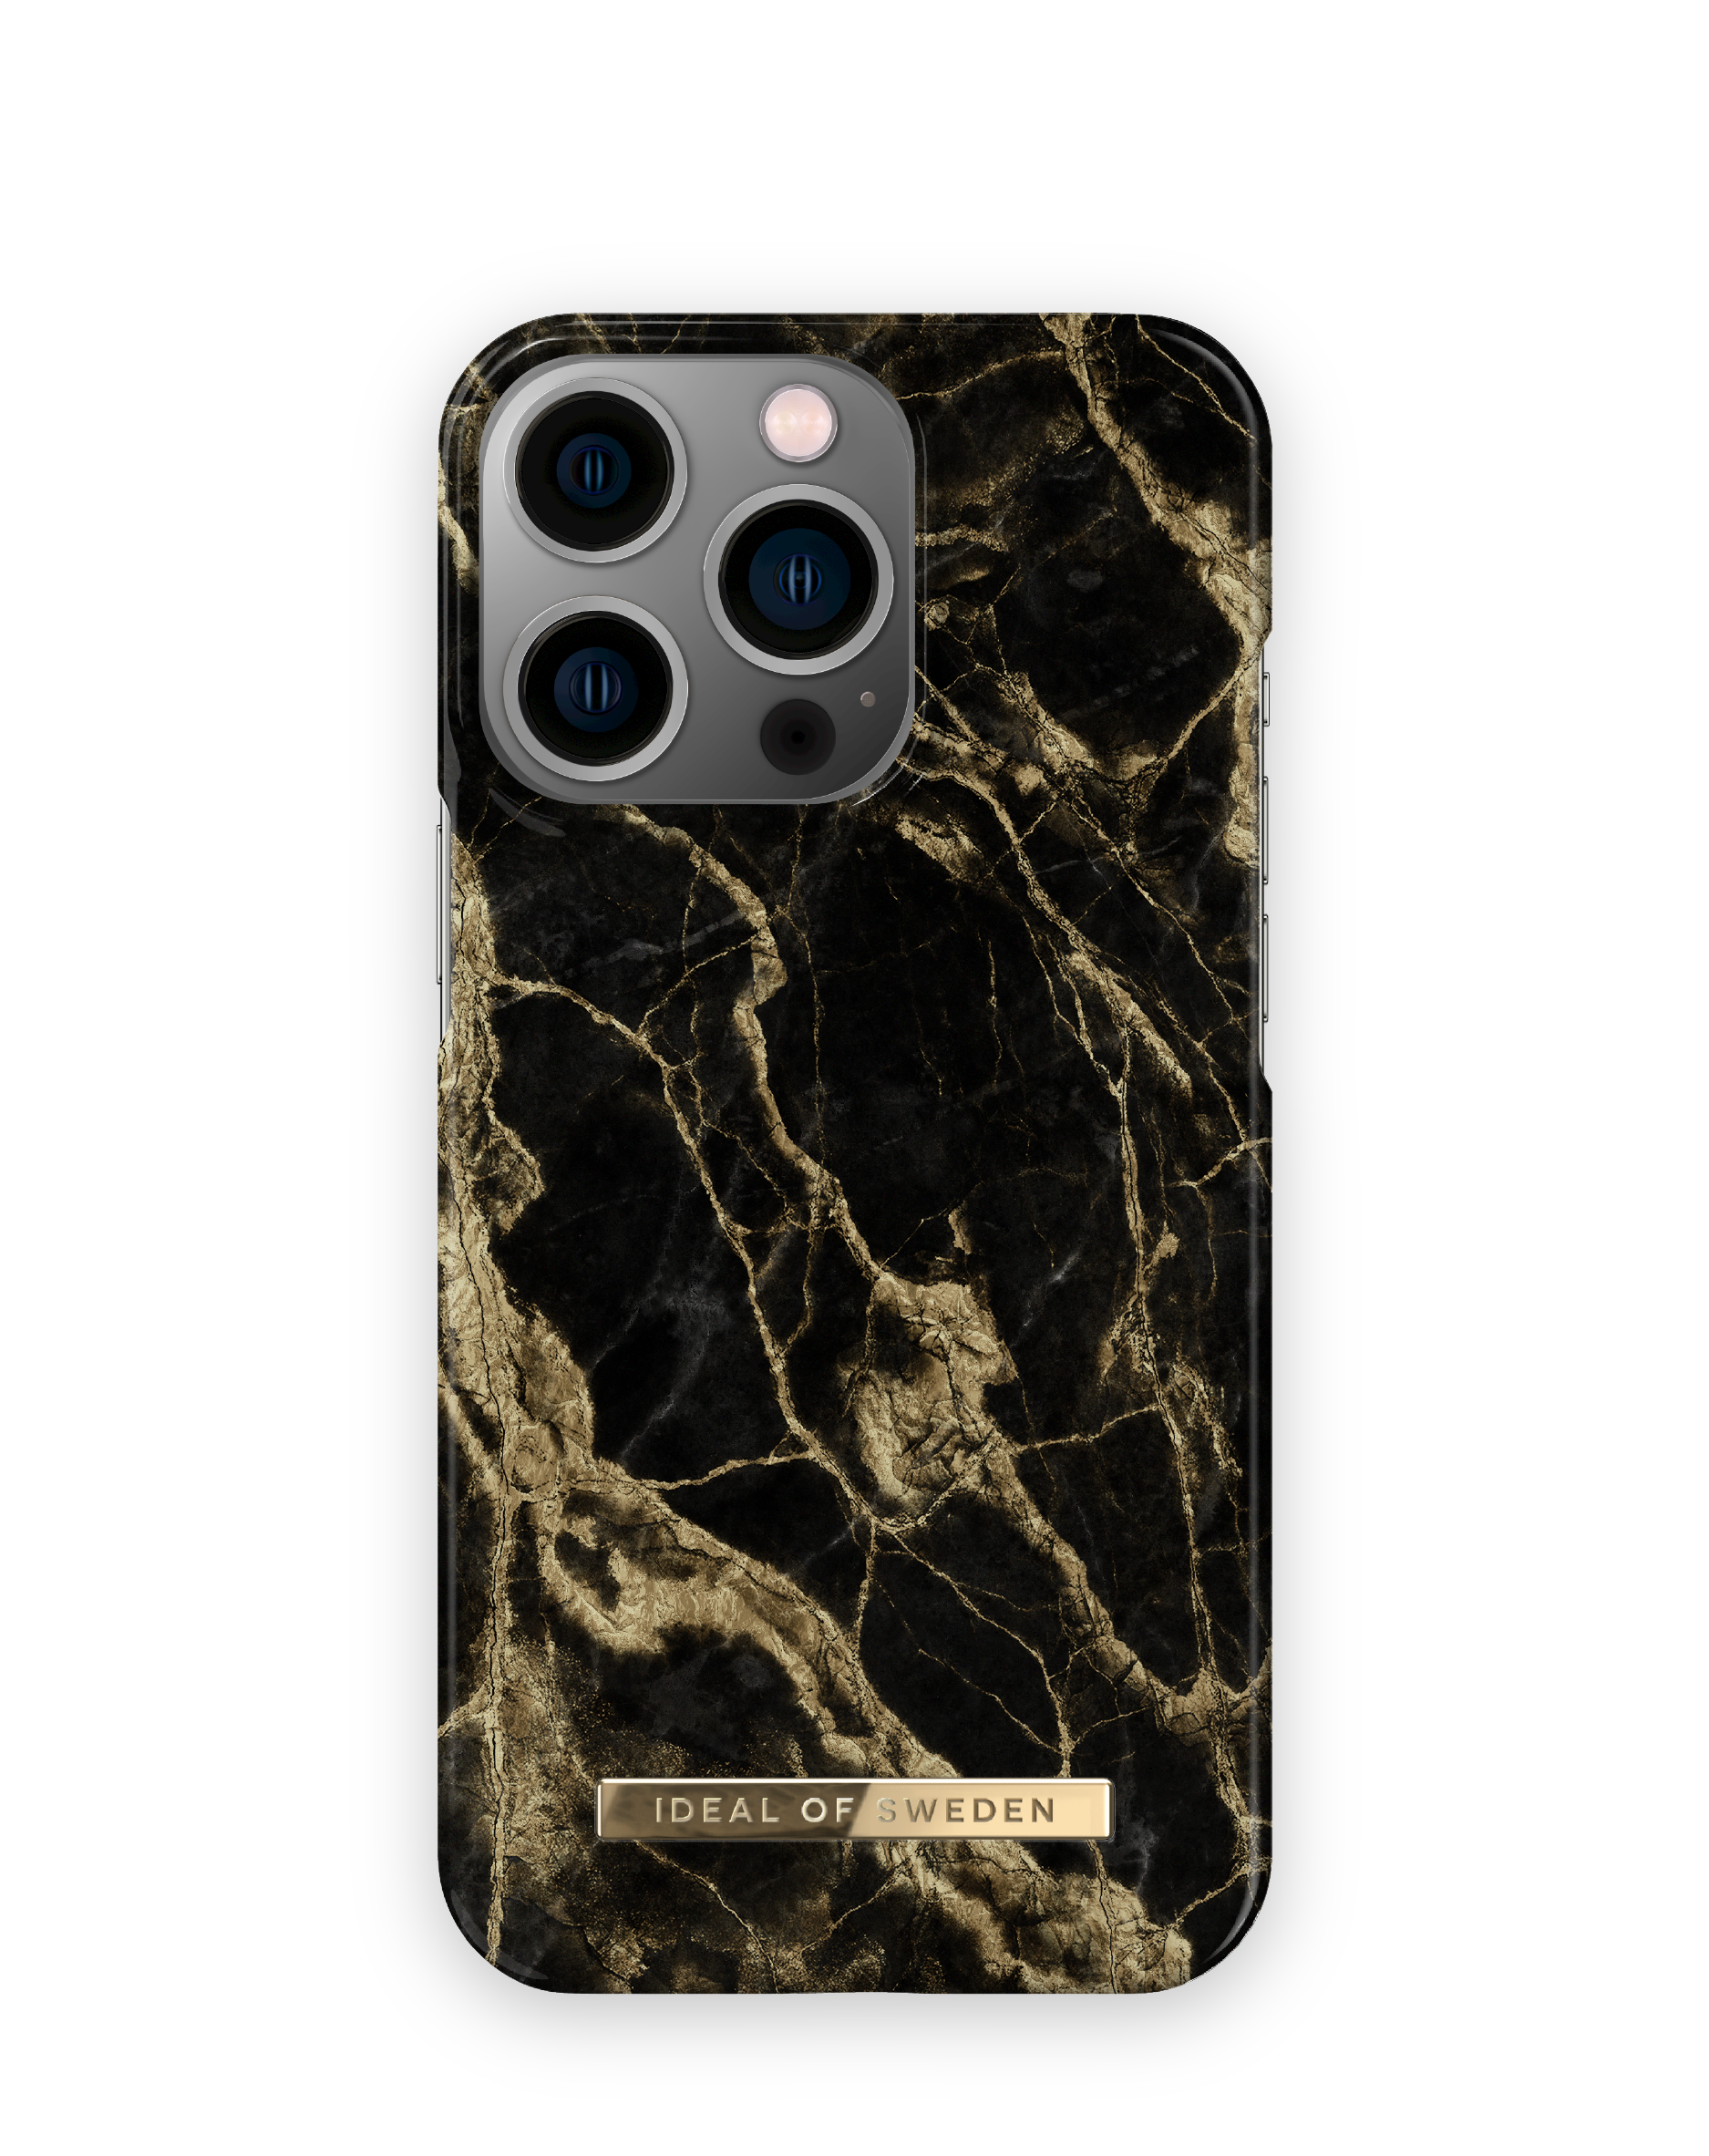 13 Apple, IDEAL Backcover, Pro, Smoke OF iPhone SWEDEN Golden IDFCSS20-I2161P-191, Marble